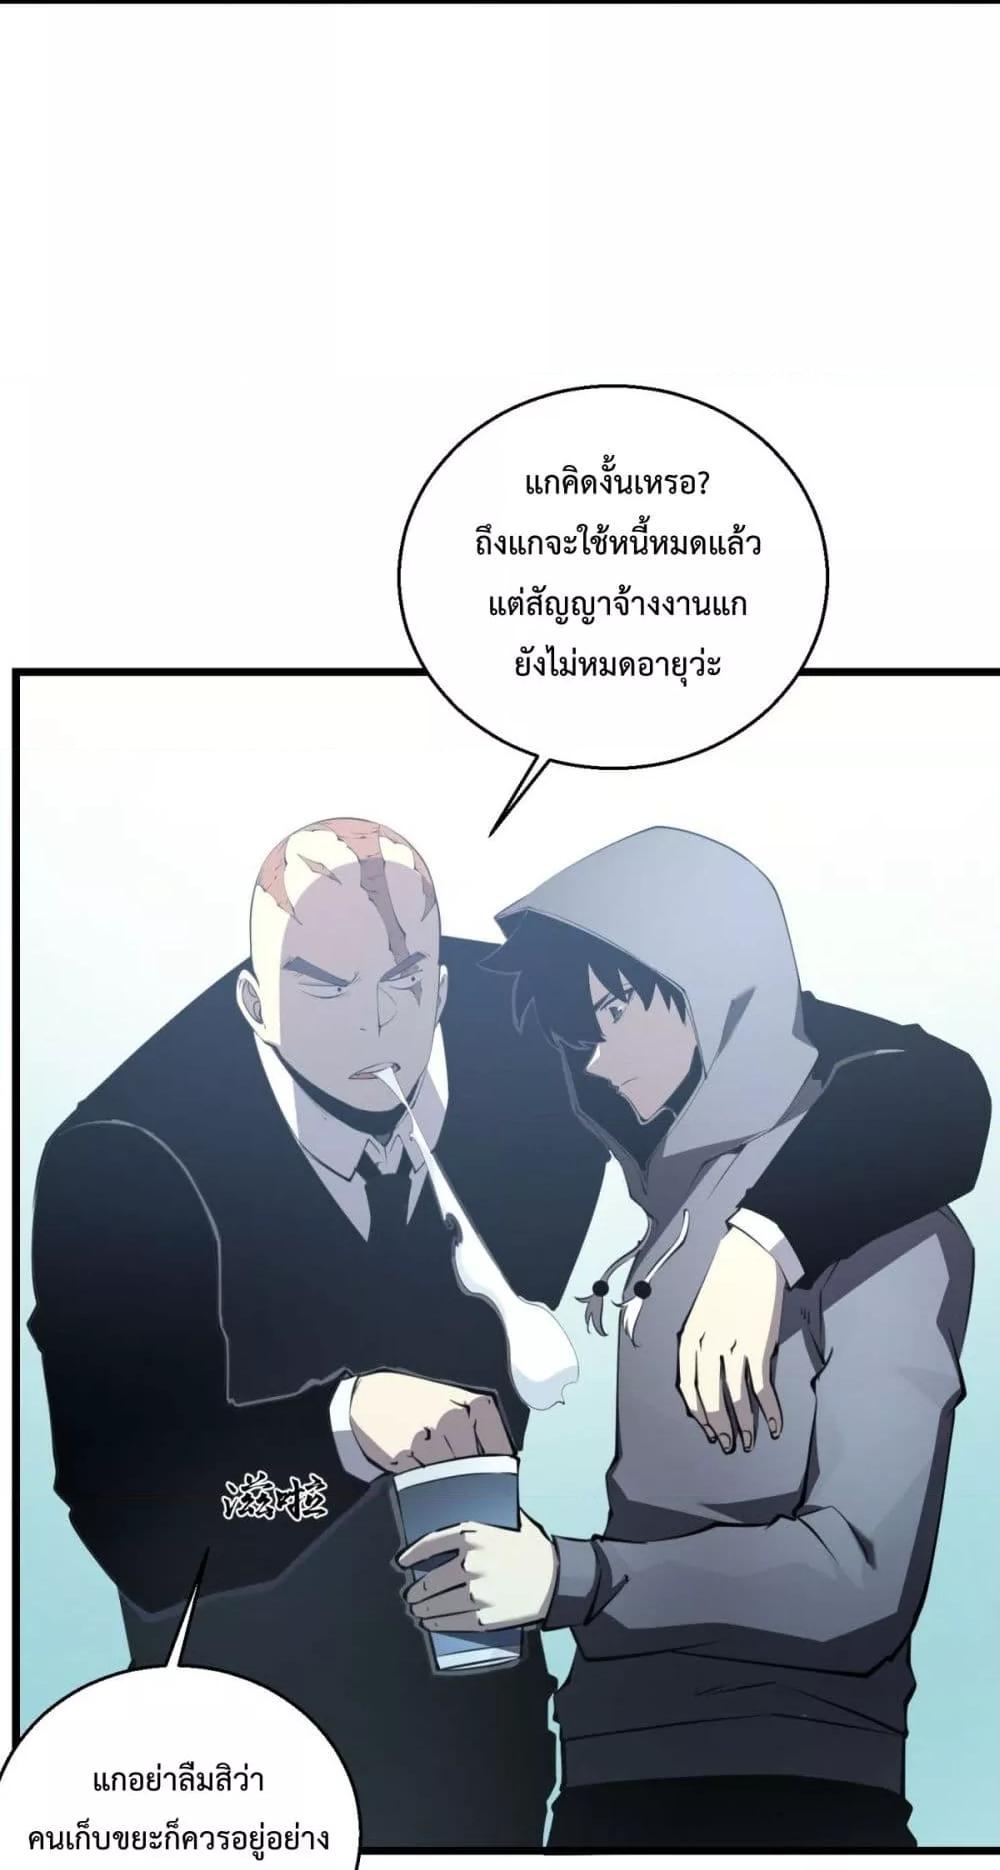 I Became The King by Scavenging ตอนที่ 11 (19)